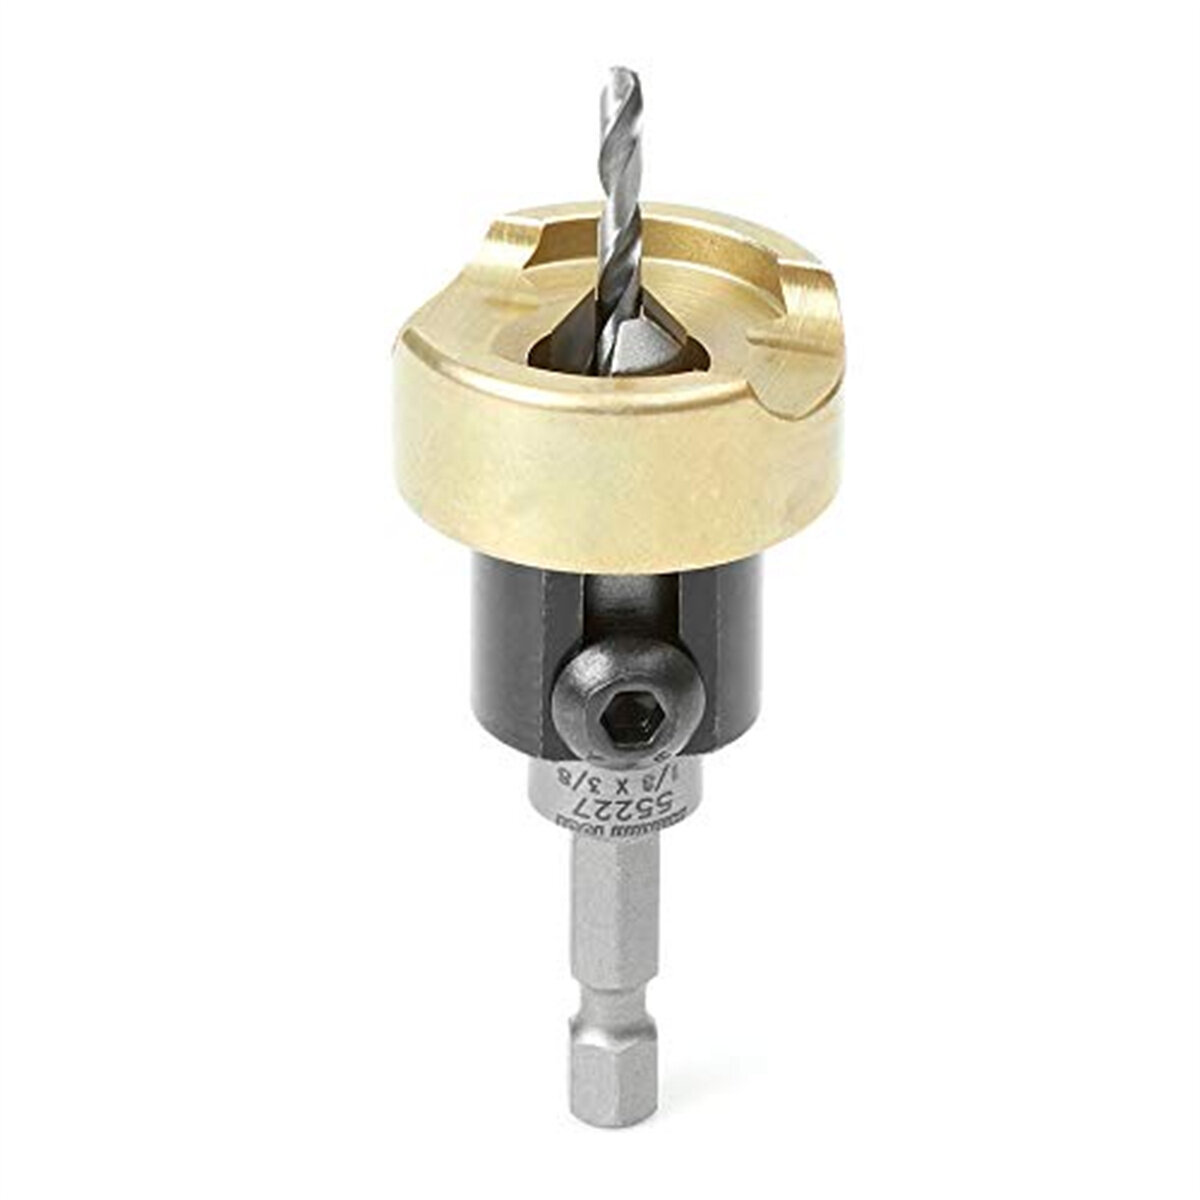 82 Degree Woodworking Countersink Drill Bits Carbide Tipped with Adjustable Depth Stop No Thrust Ball Bearing